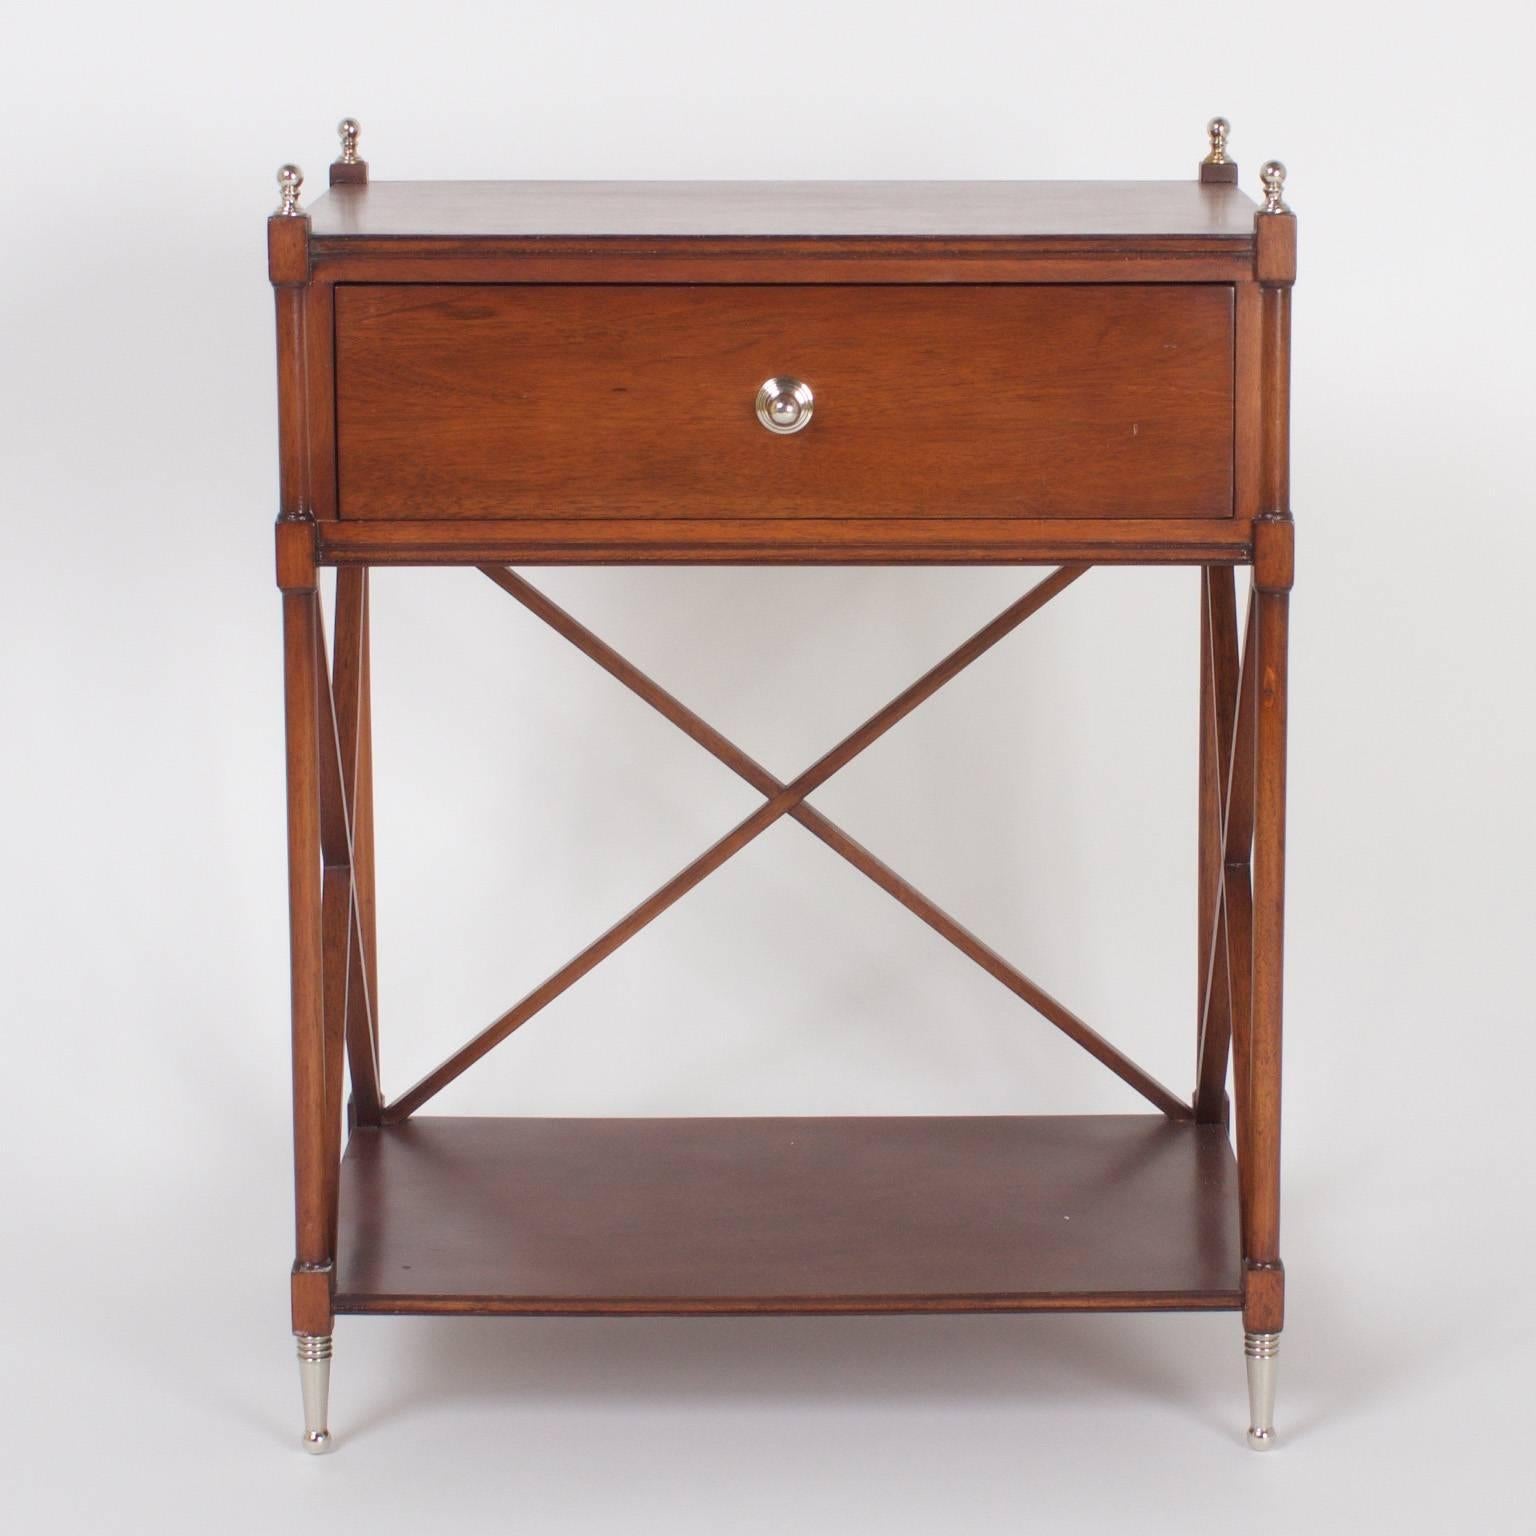 Elegant pair of mahogany nightstands or tables with strong lines and a mellow finish, trimmed with silver metal pulls, finials, and feet. The perfect bridge between modern and classical.